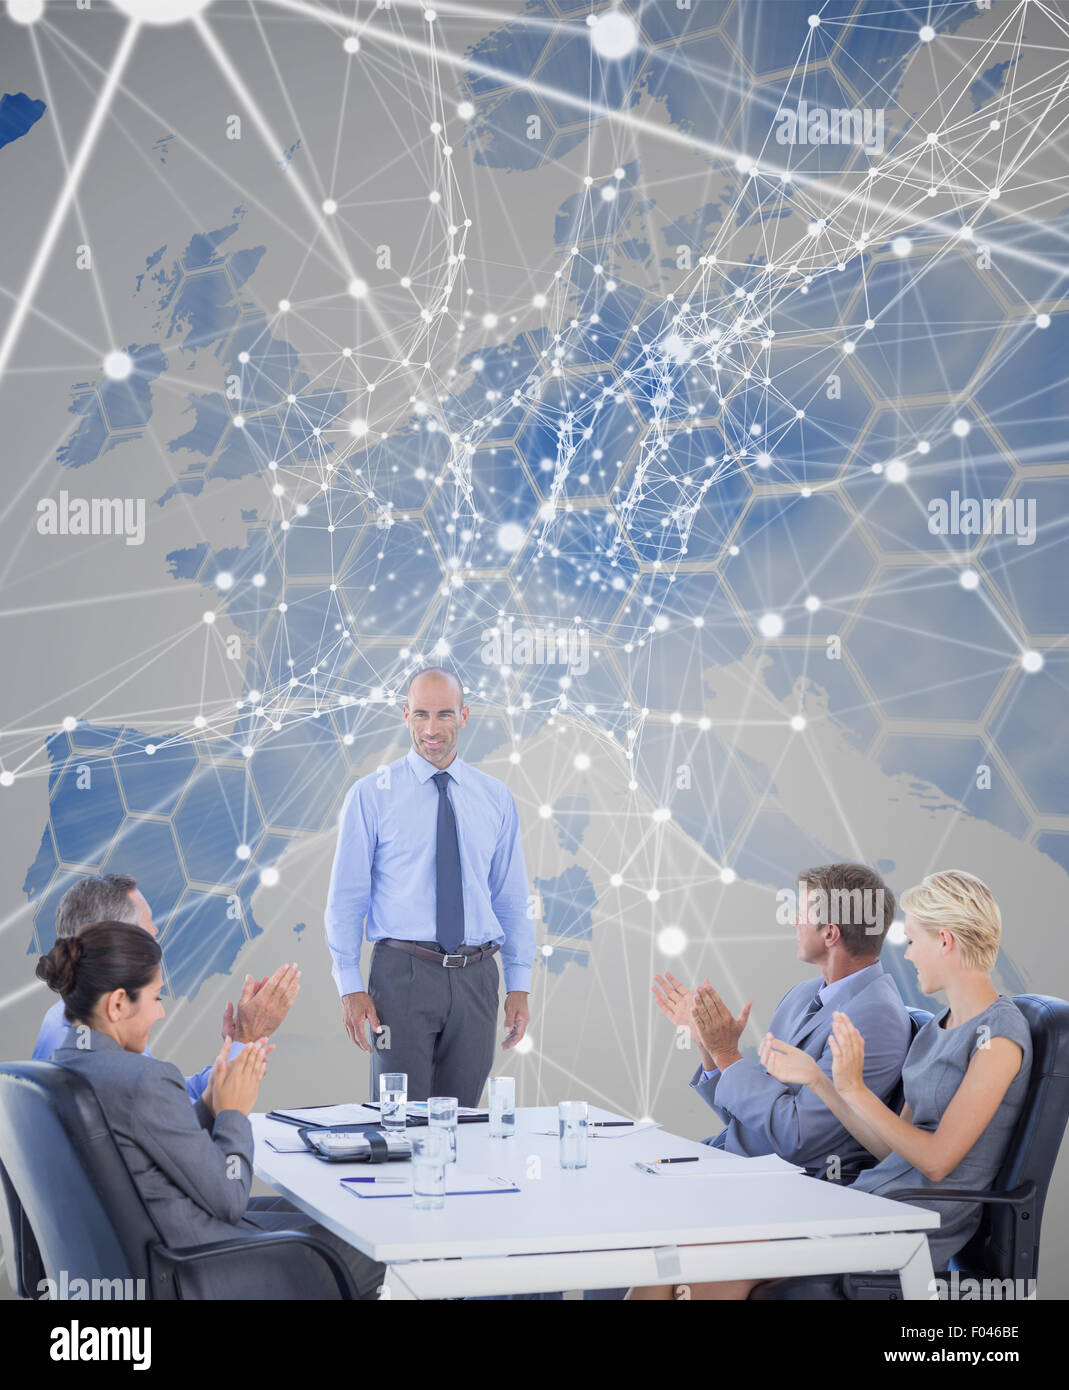 Composite image of business people applauding during meeting Stock Photo